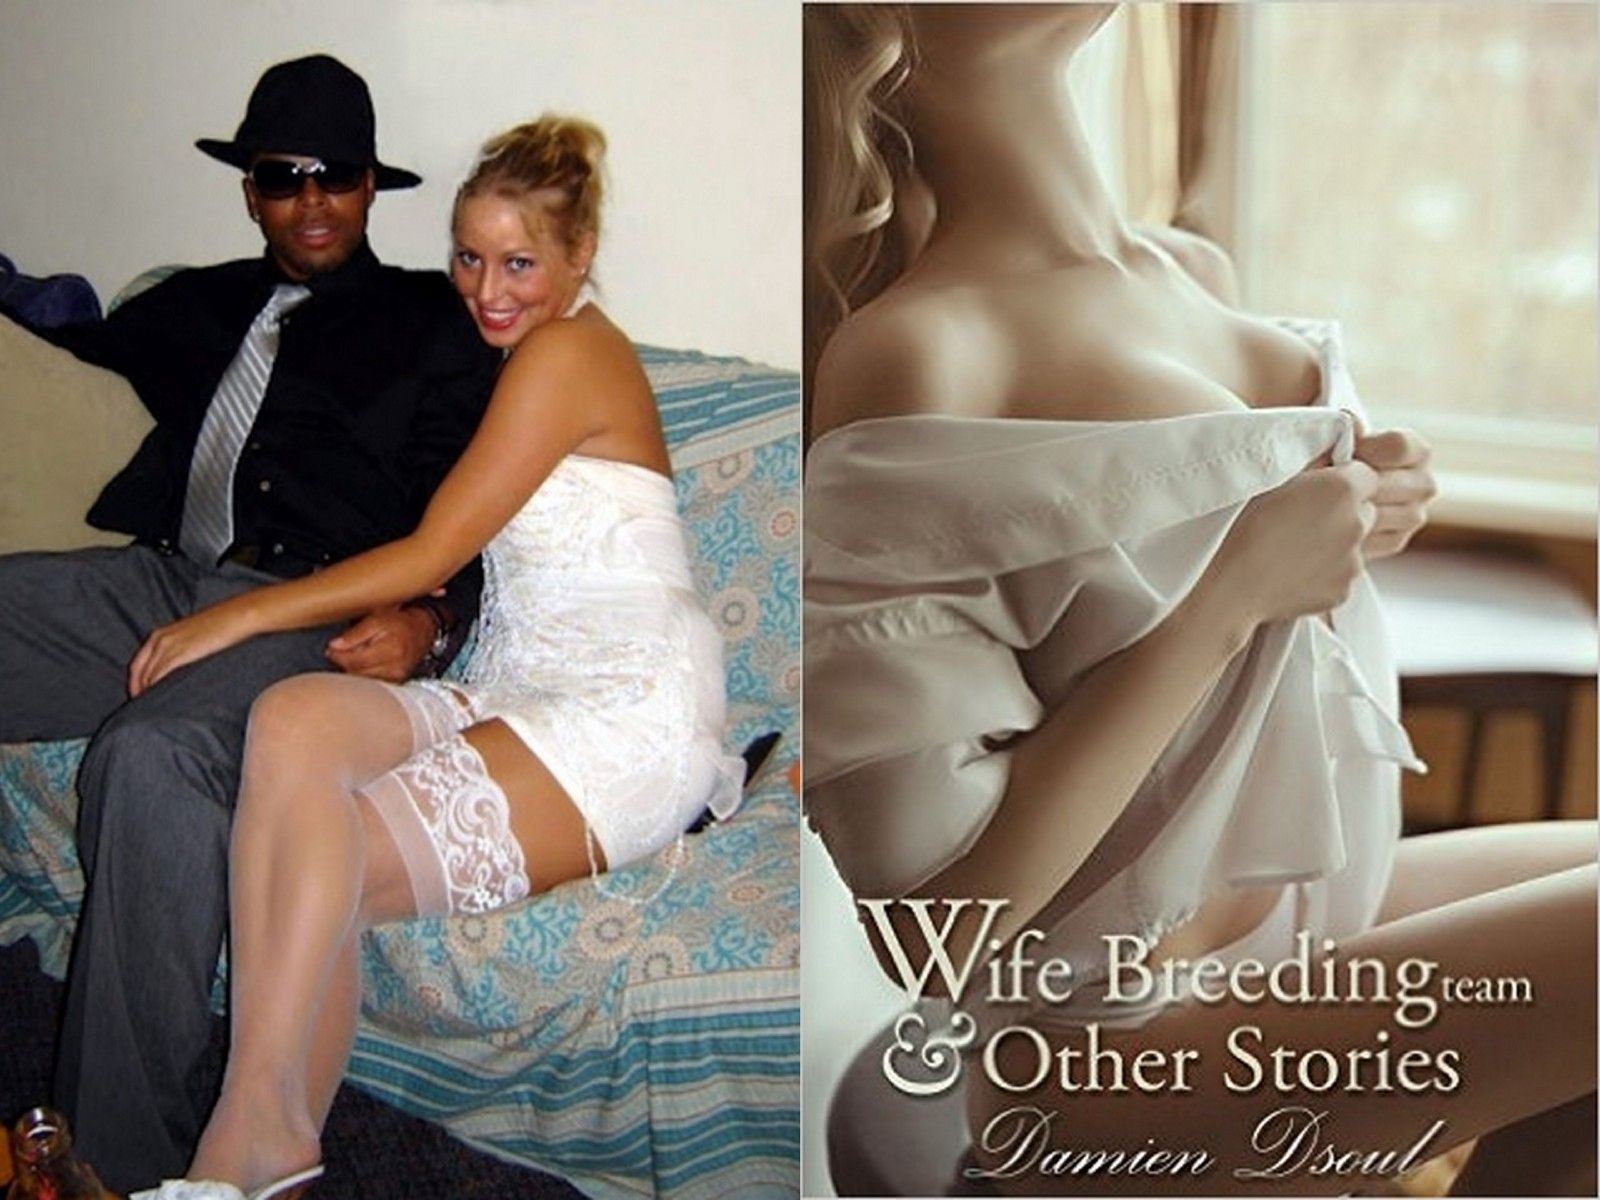 Genghis reccomend New wife erotic story